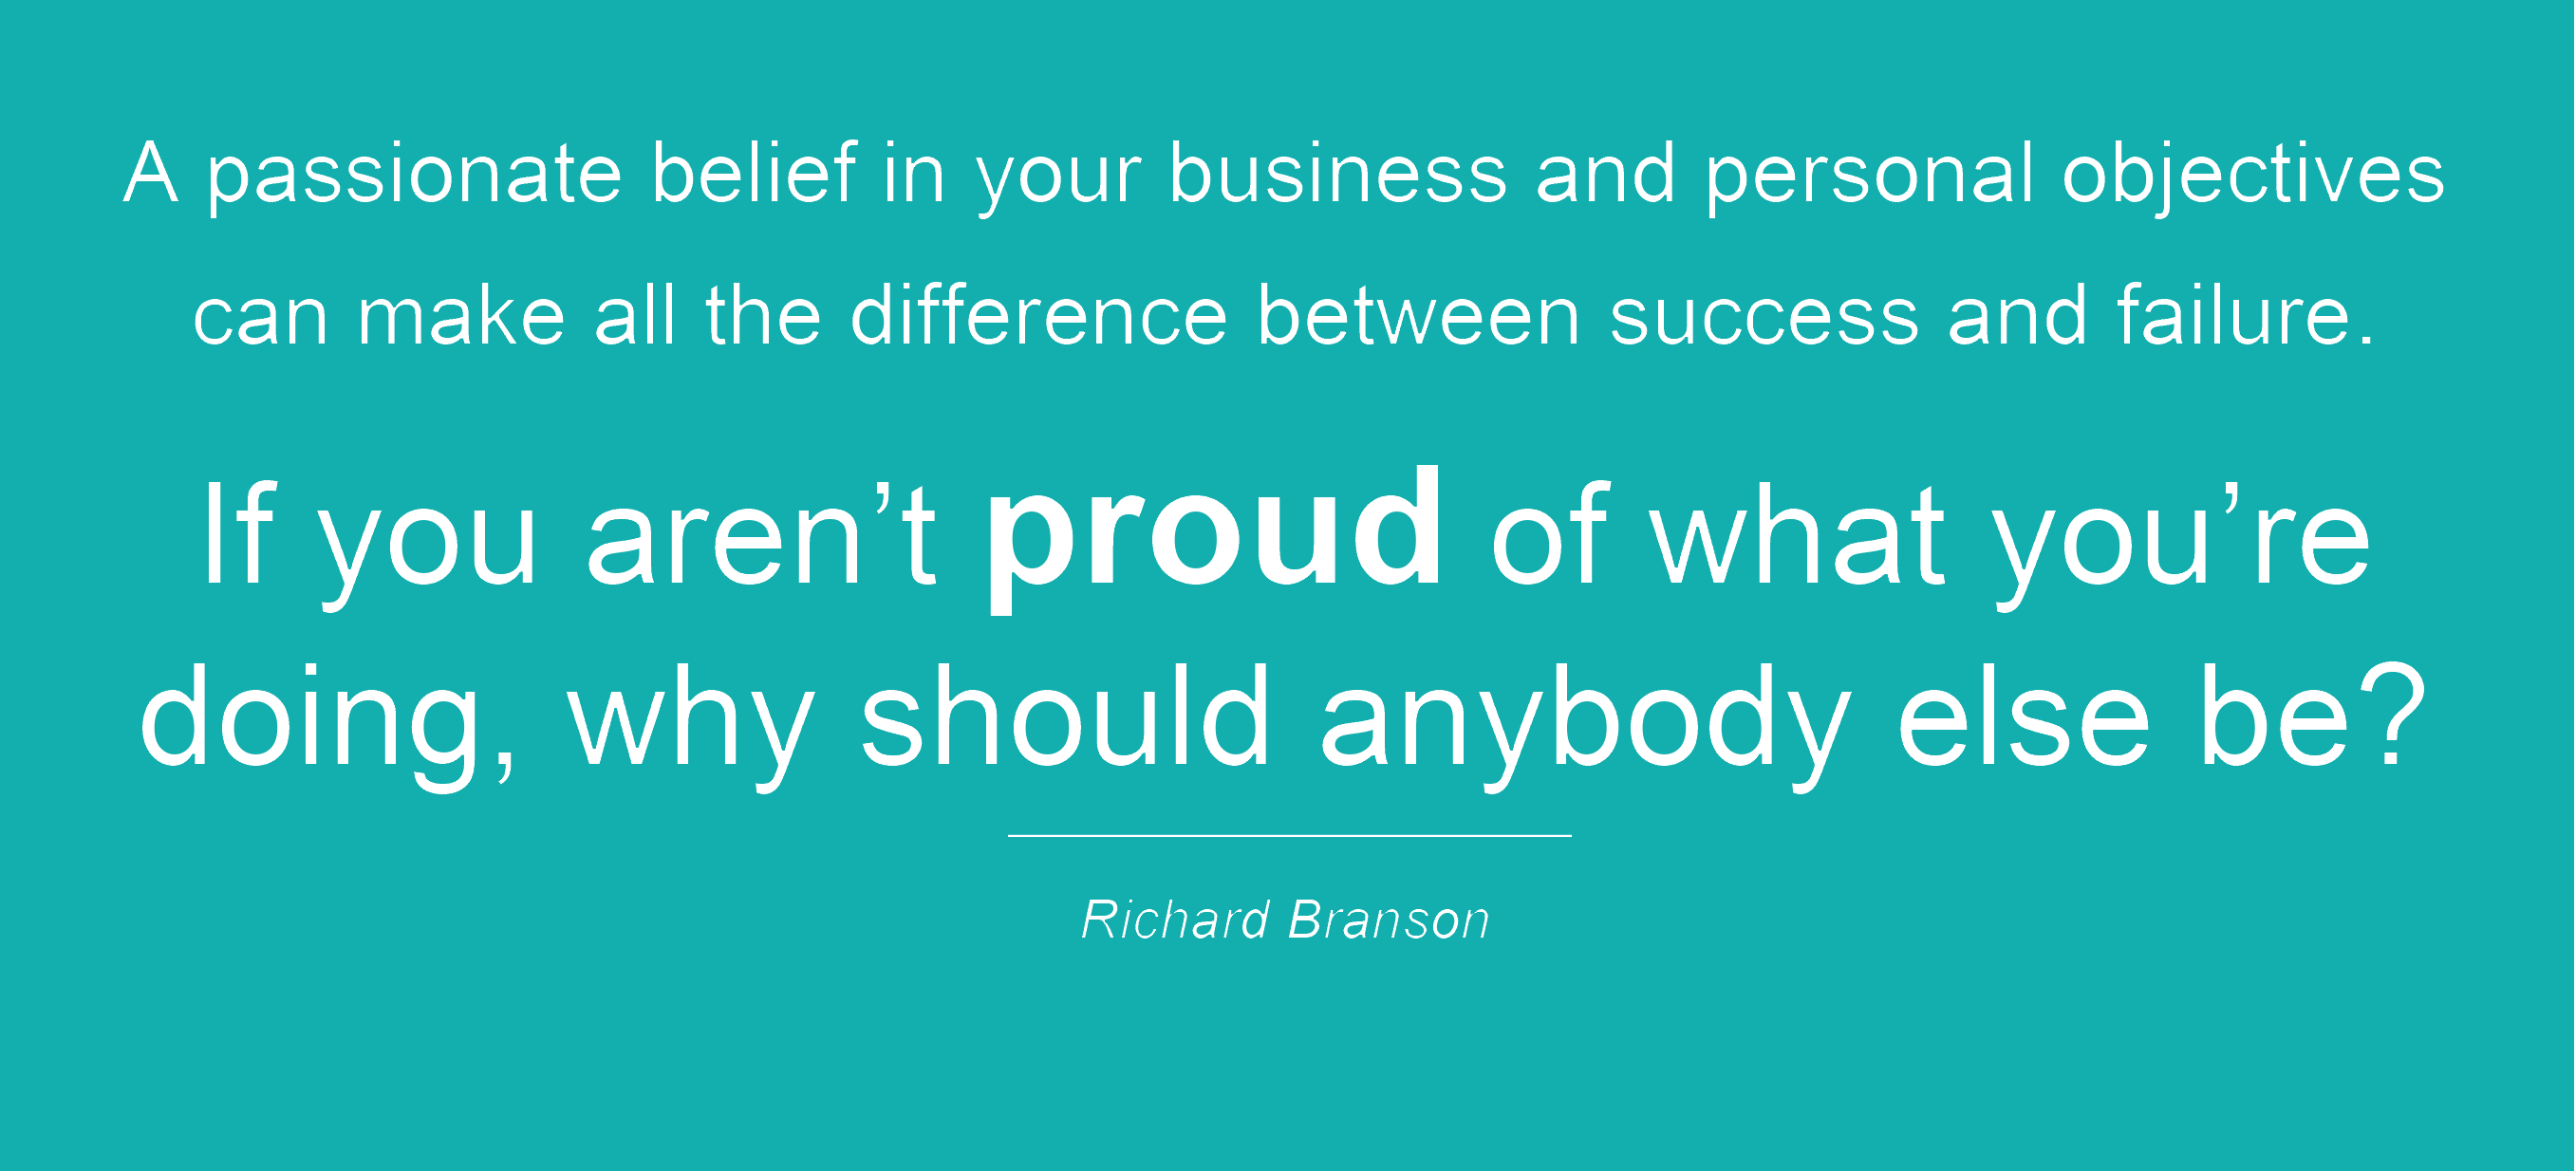 This is a Quote from Richard Branson -'A passionate belief in your business and personal objectives can make
    								all the difference between success and failure. If you aren't proud of what you're doing, why should anybody else be?'